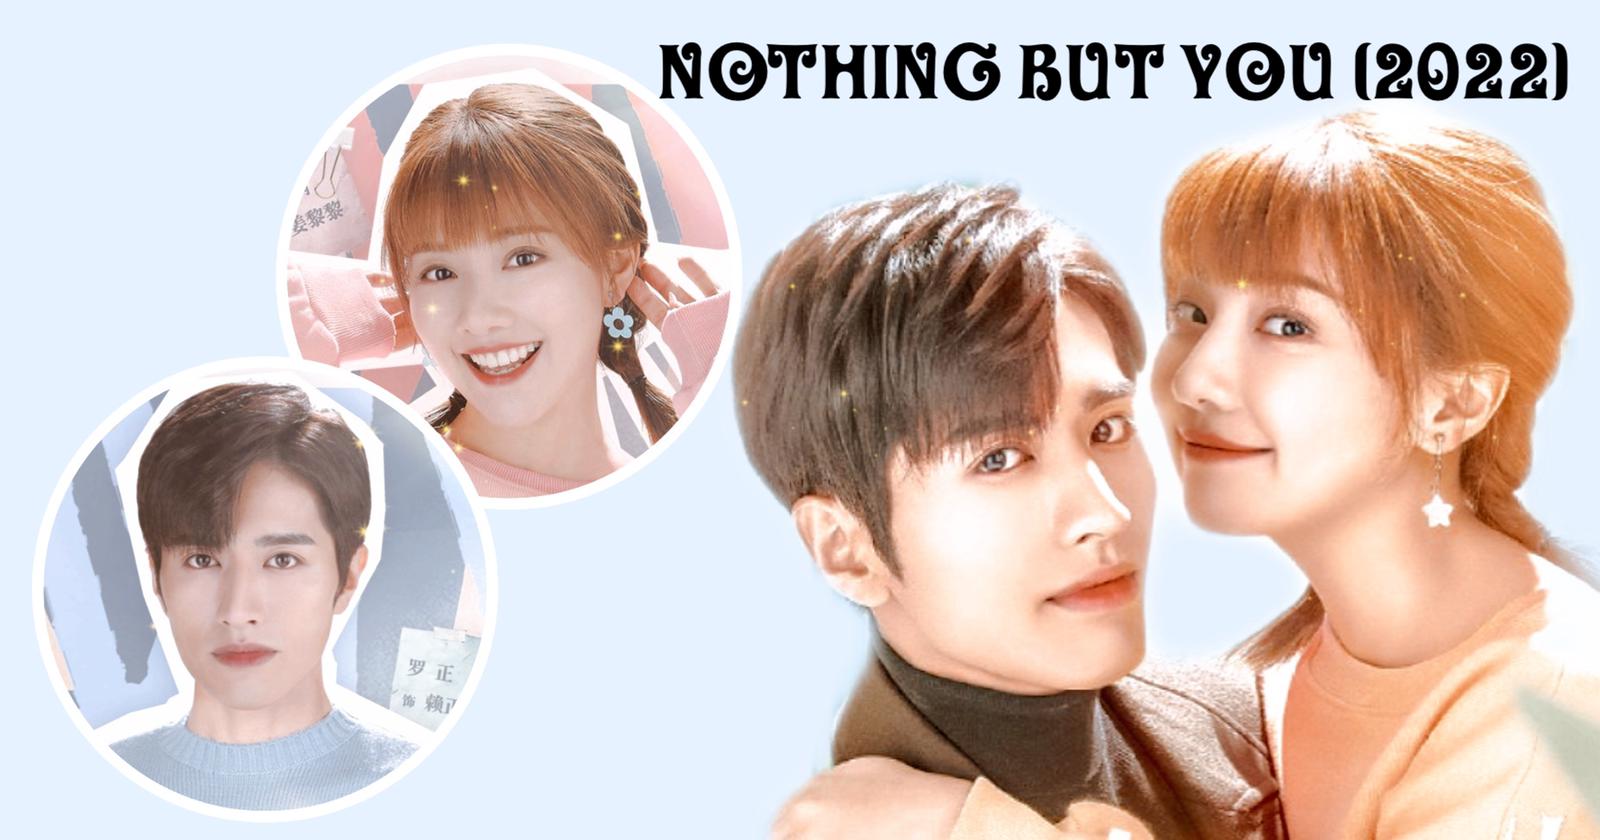  Nothing But You (2022)